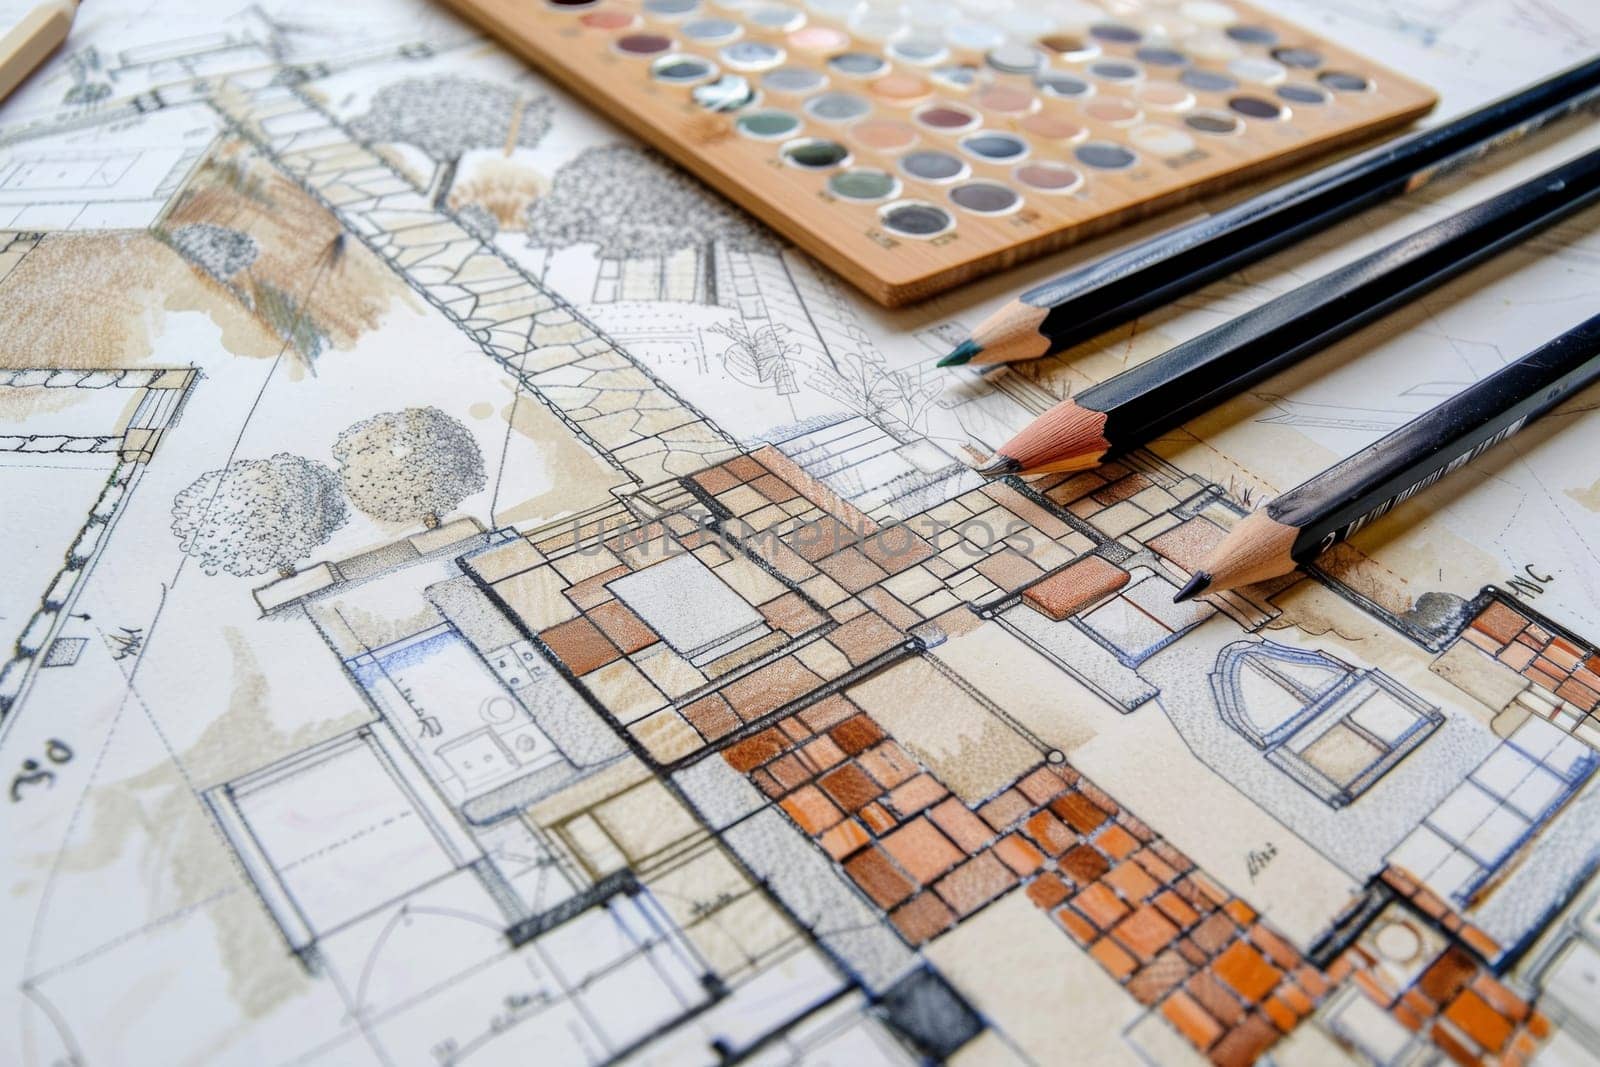 A table covered in various drawings and scattered pencils, showcasing creativity and planning for a project renovation sketch with plans and design ideas.